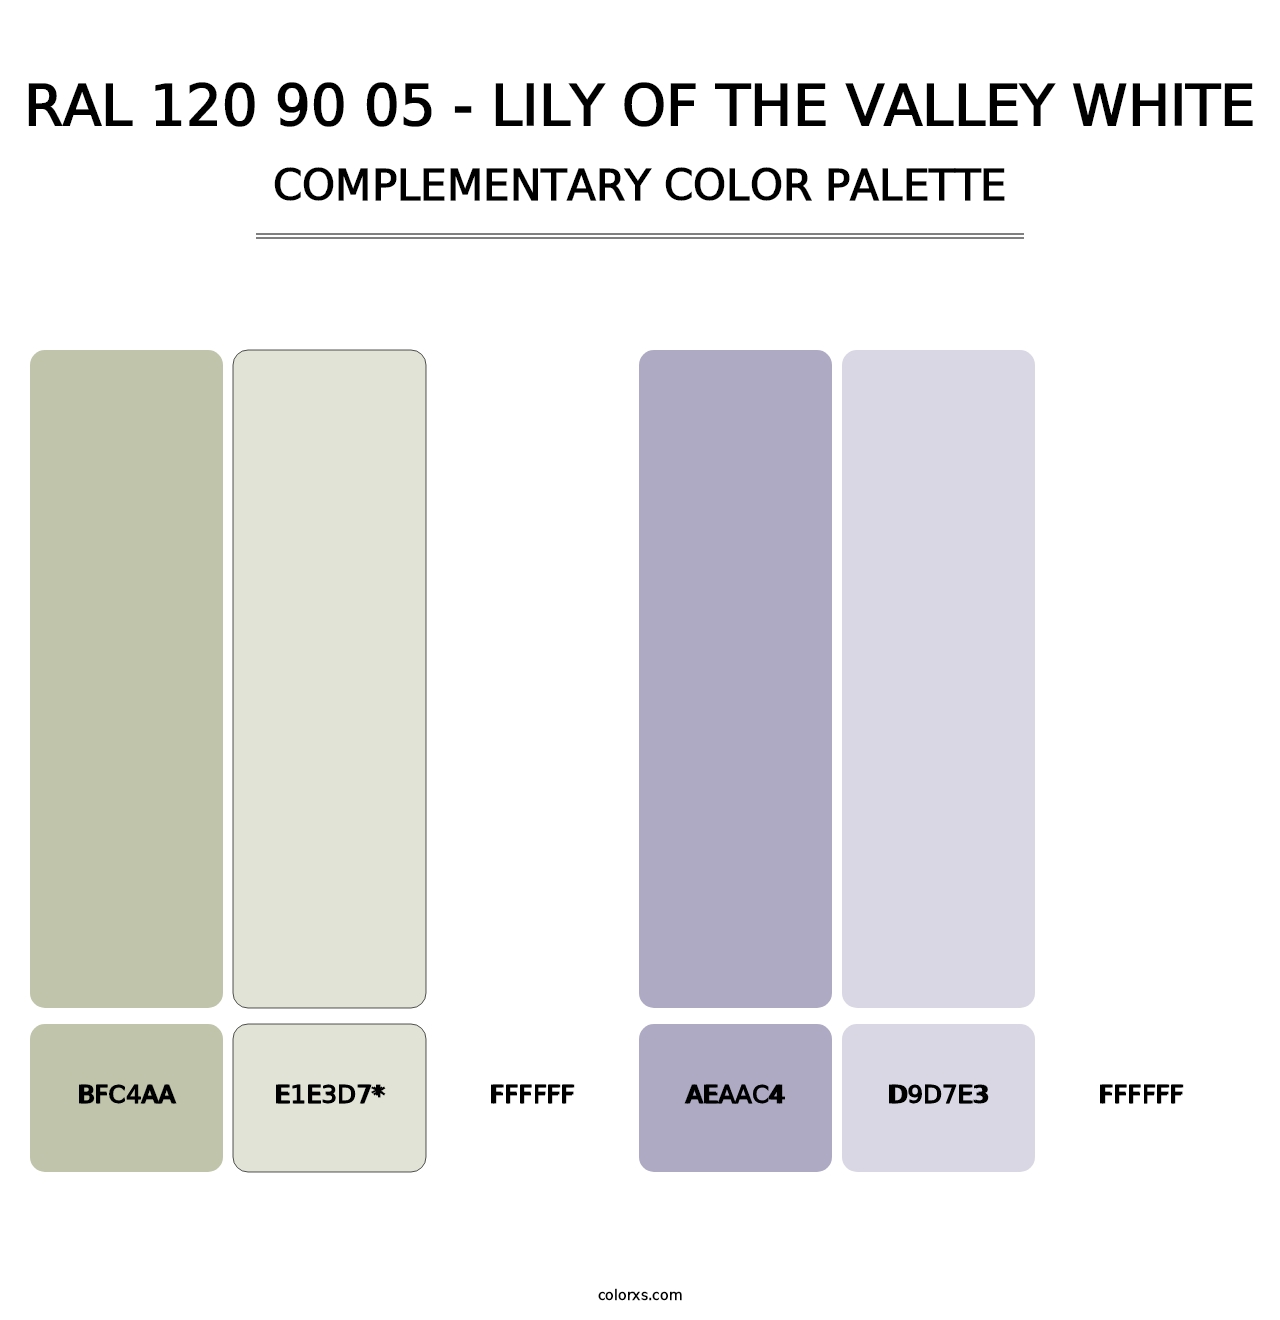 RAL 120 90 05 - Lily of the Valley White - Complementary Color Palette